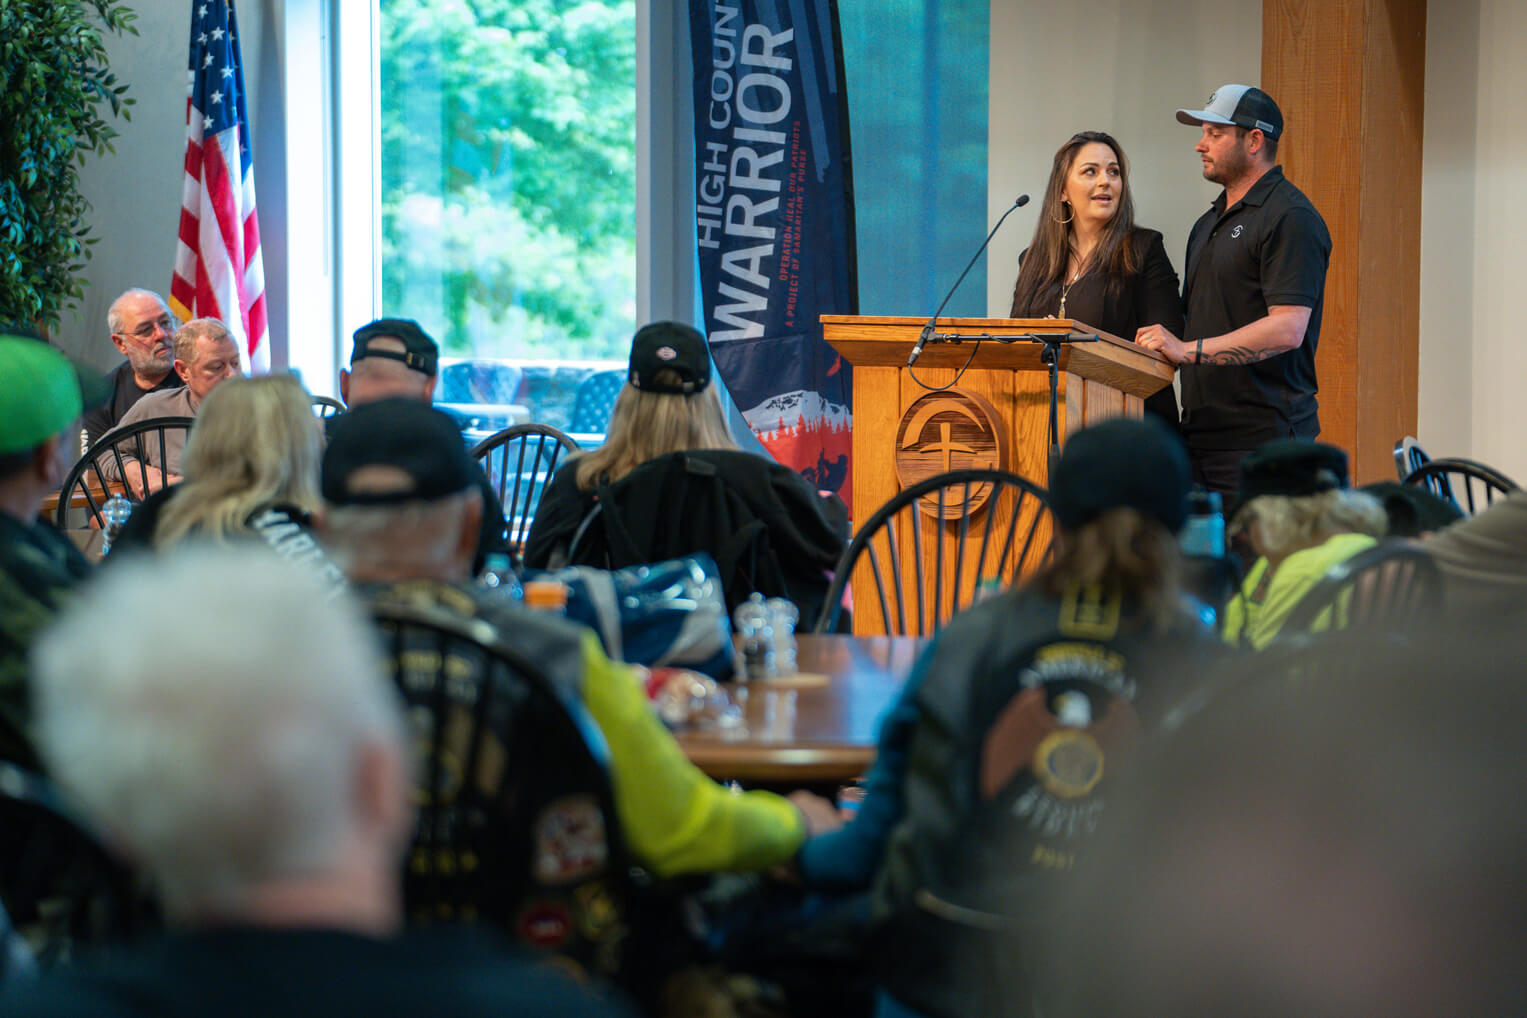 Wounded Army veteran Sean Karpf and his wife, Brandy, shared with the audience how God transformed them through Operation Heal Our Patriots.